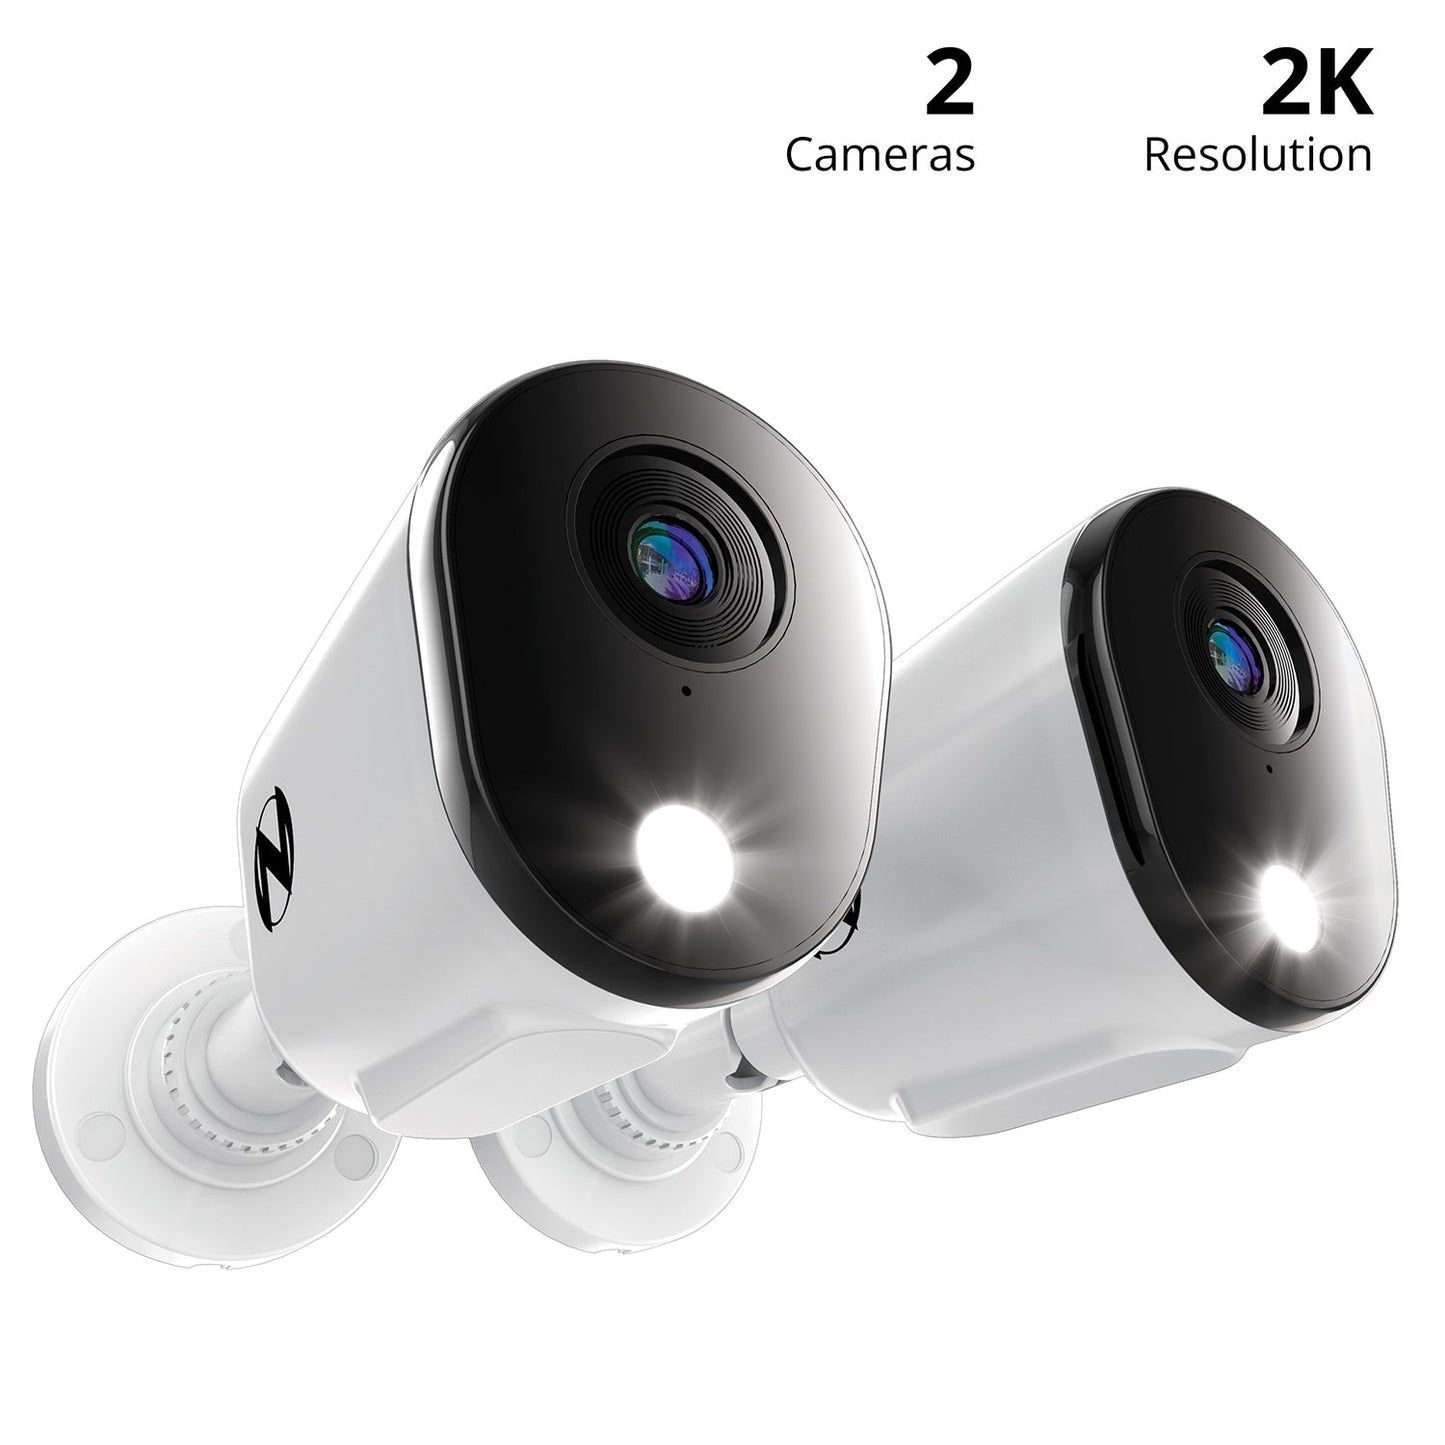 Refurbished Add On Wired 2K Deterrence Cameras with 2-Way Audio - 2 Pack - White